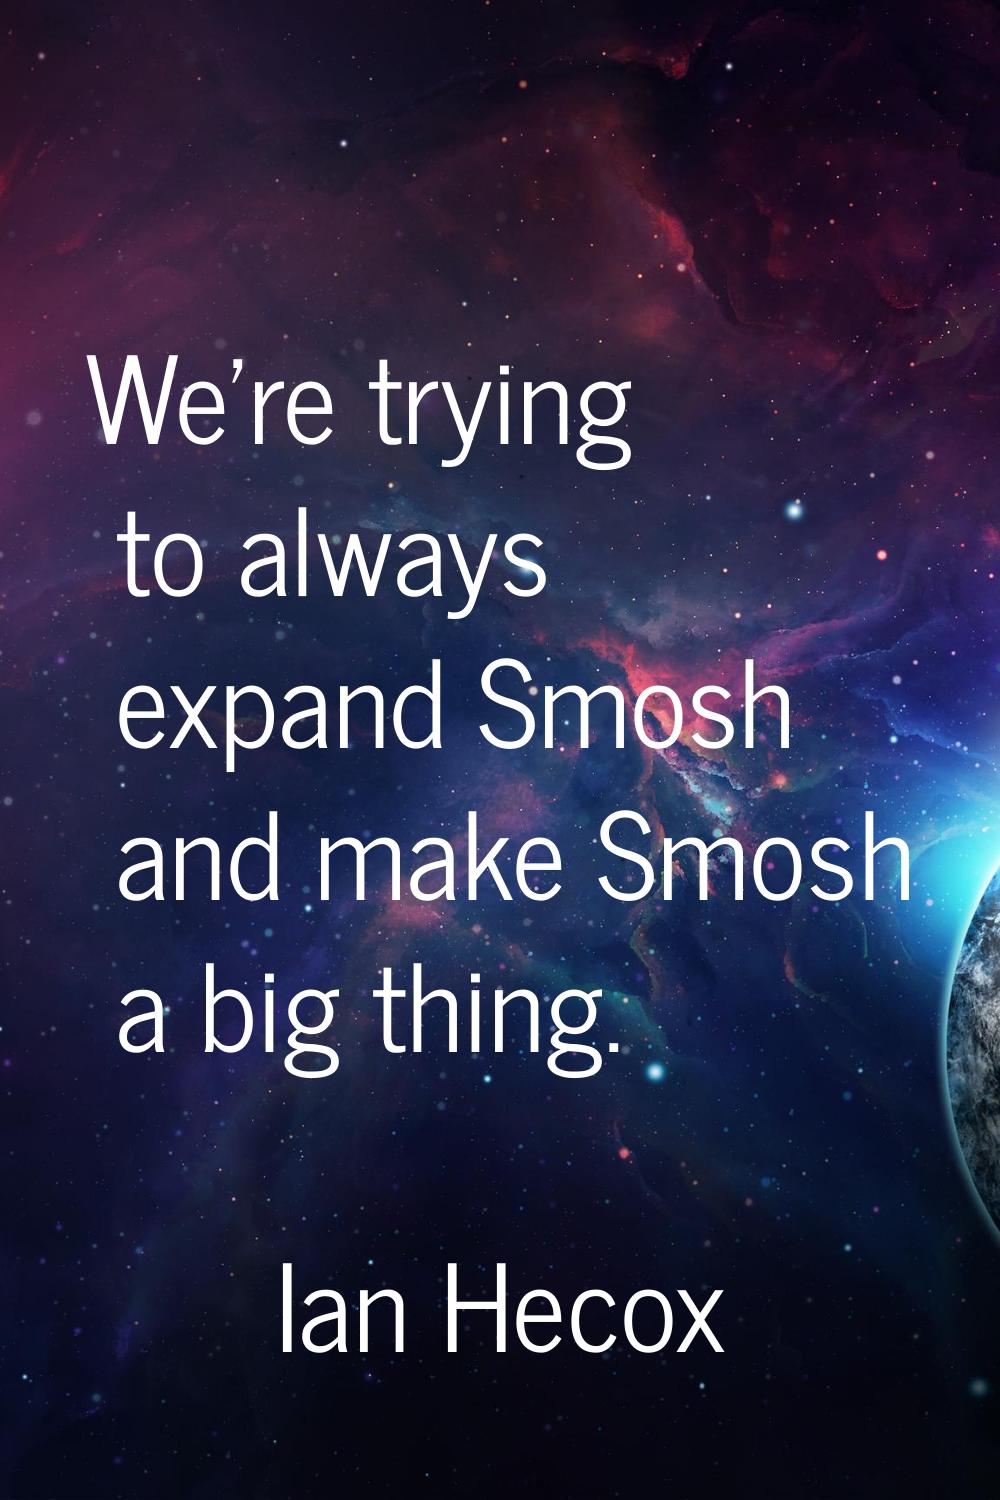 We're trying to always expand Smosh and make Smosh a big thing.